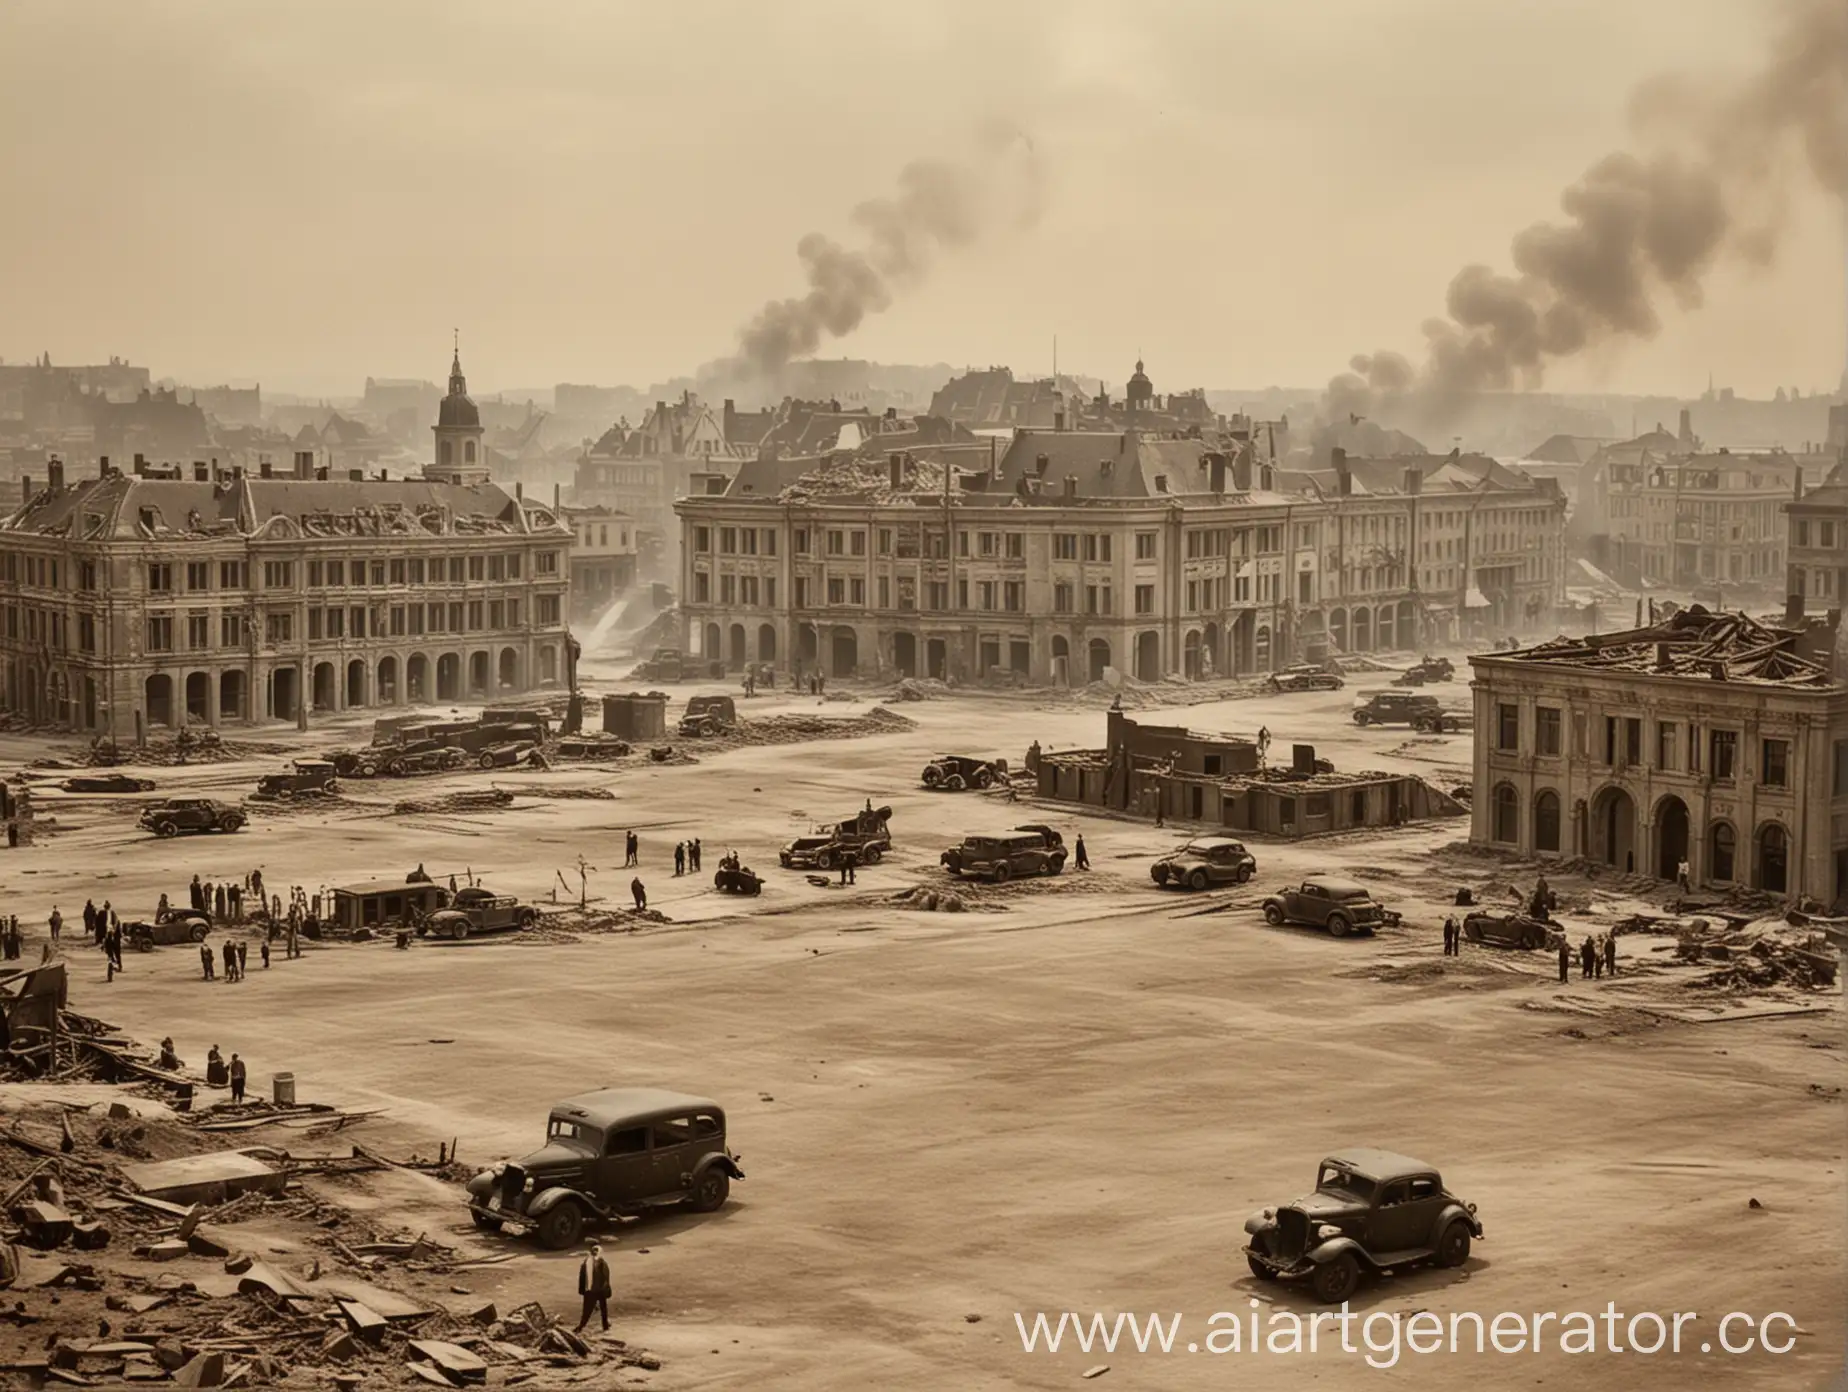 A city square with an administration building in the center, next to a car from the 1930s or 40s. The buildings resemble German ones from the 1930s or ancient times. There's destruction around, fires on the horizon and a blown-up tank from World War II.